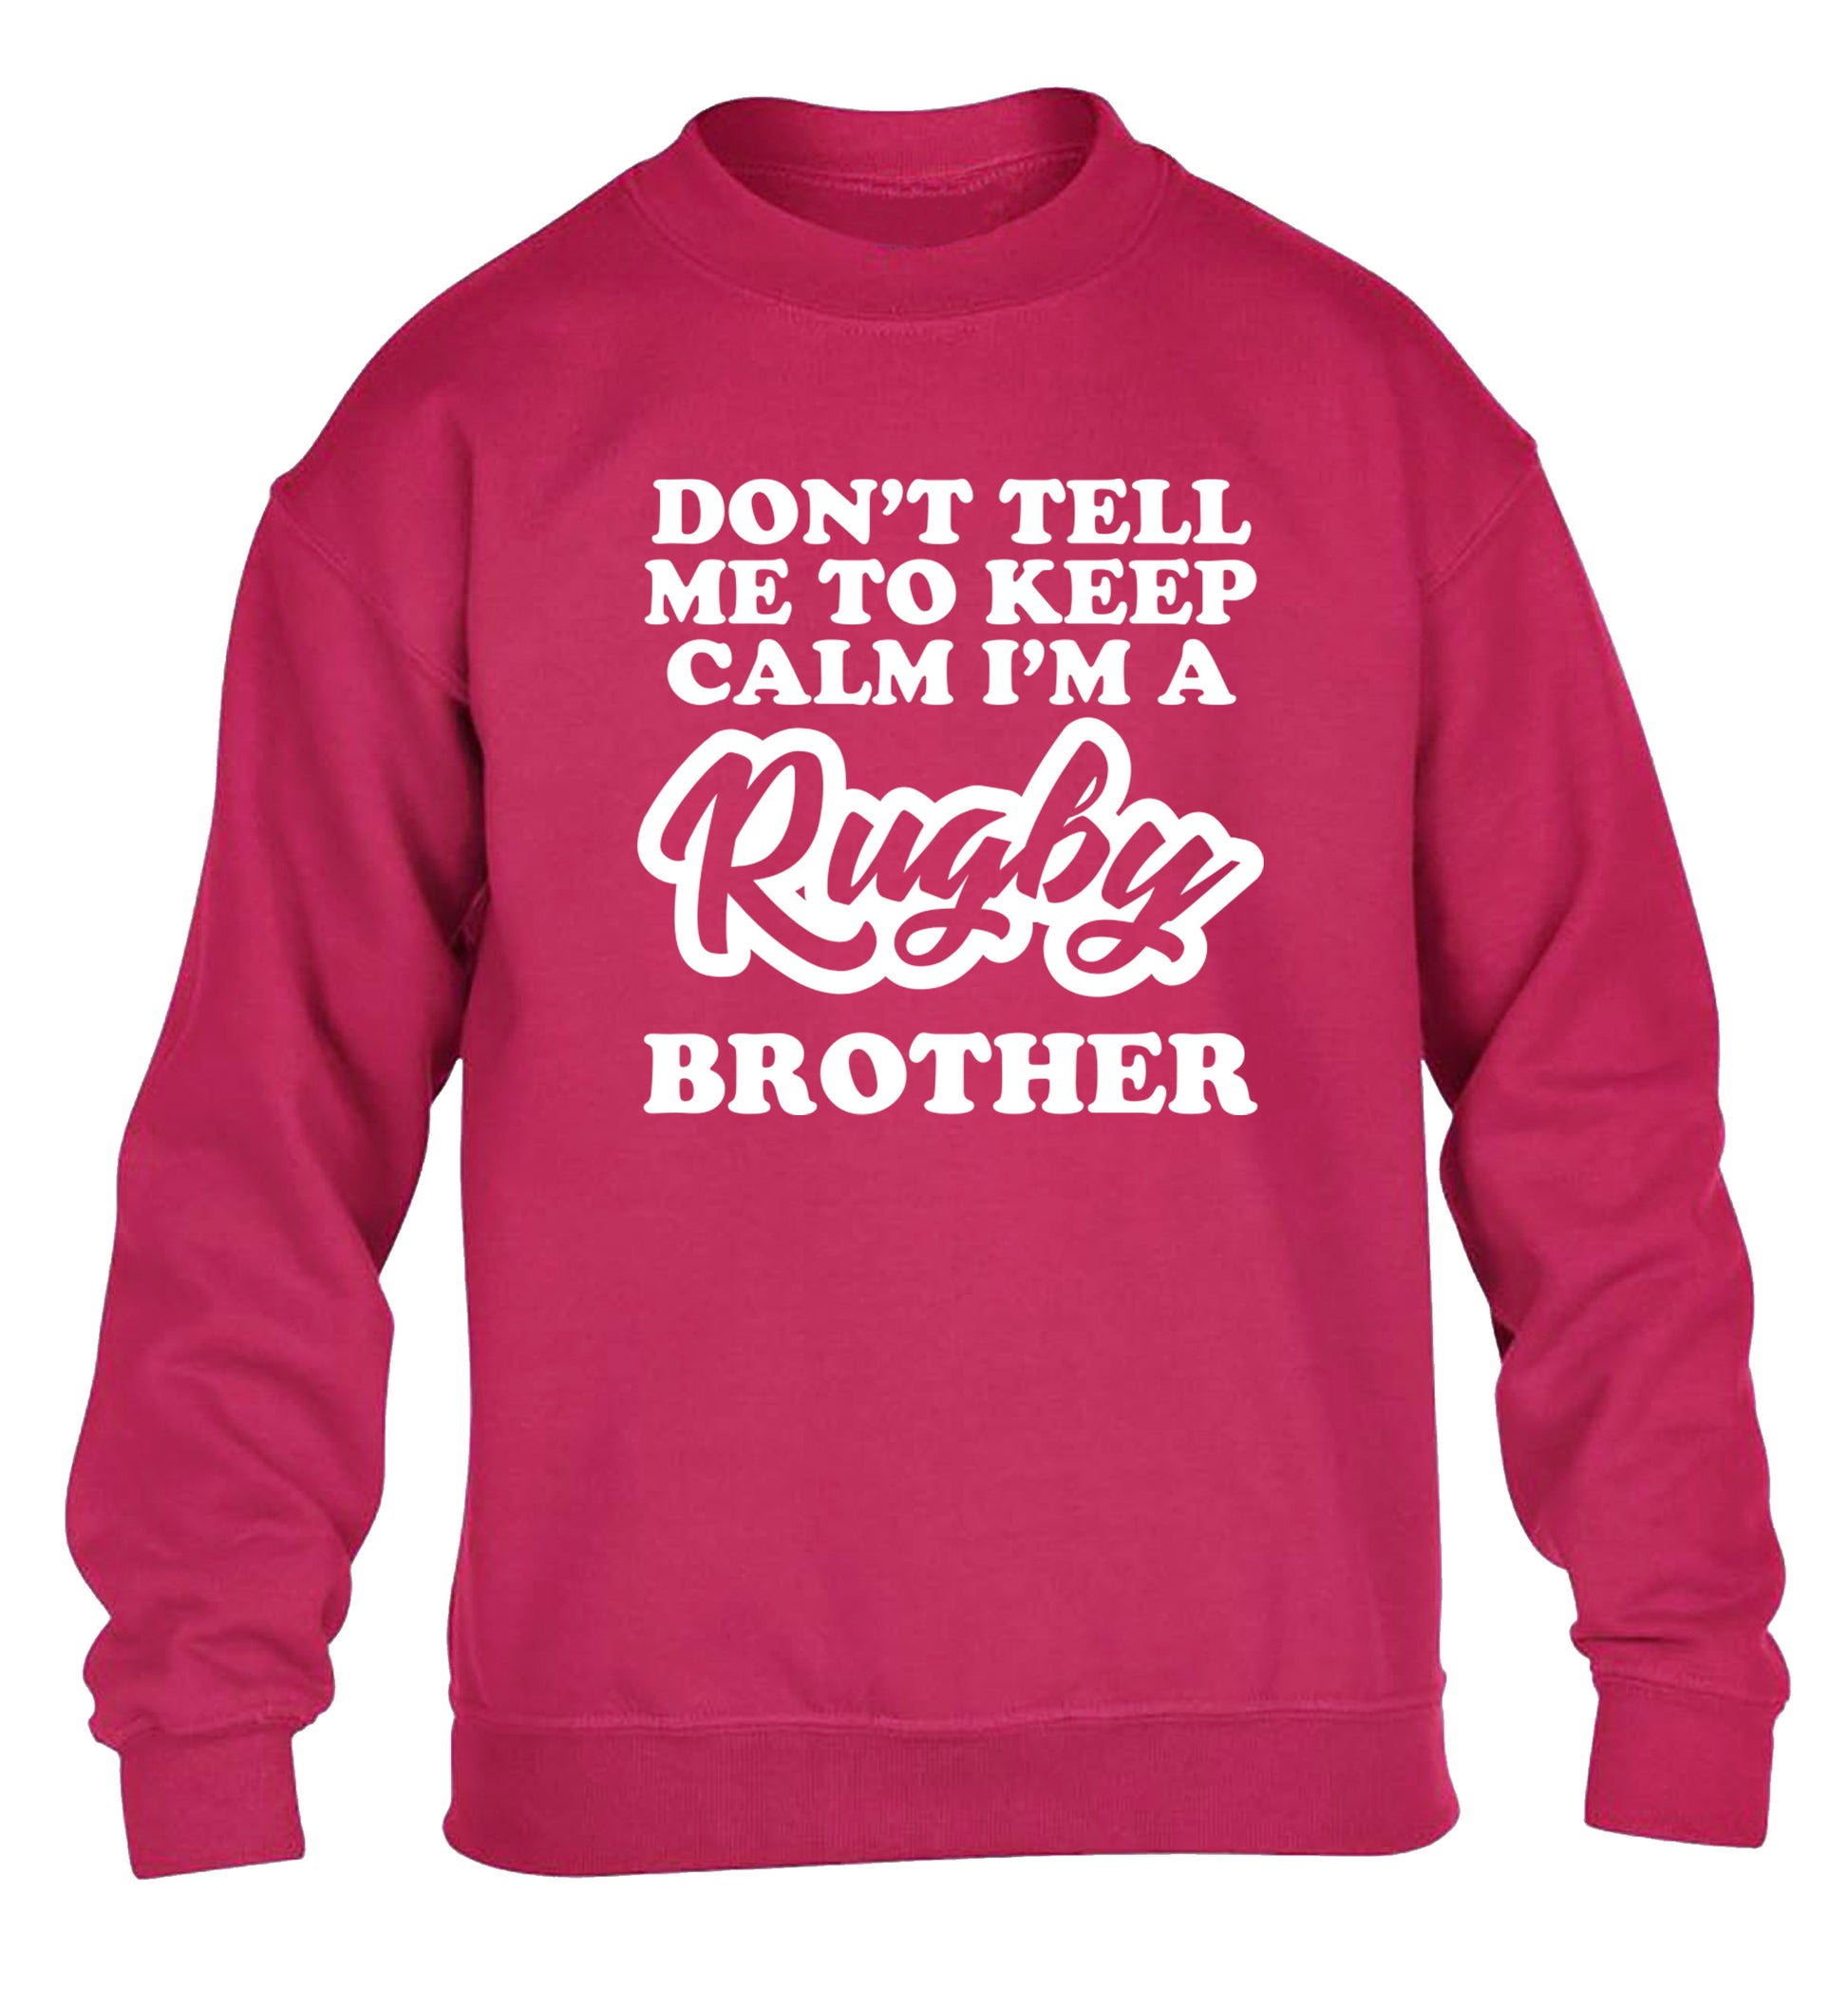 Don't tell me keep calm I'm a rugby brother children's pink sweater 12-13 Years